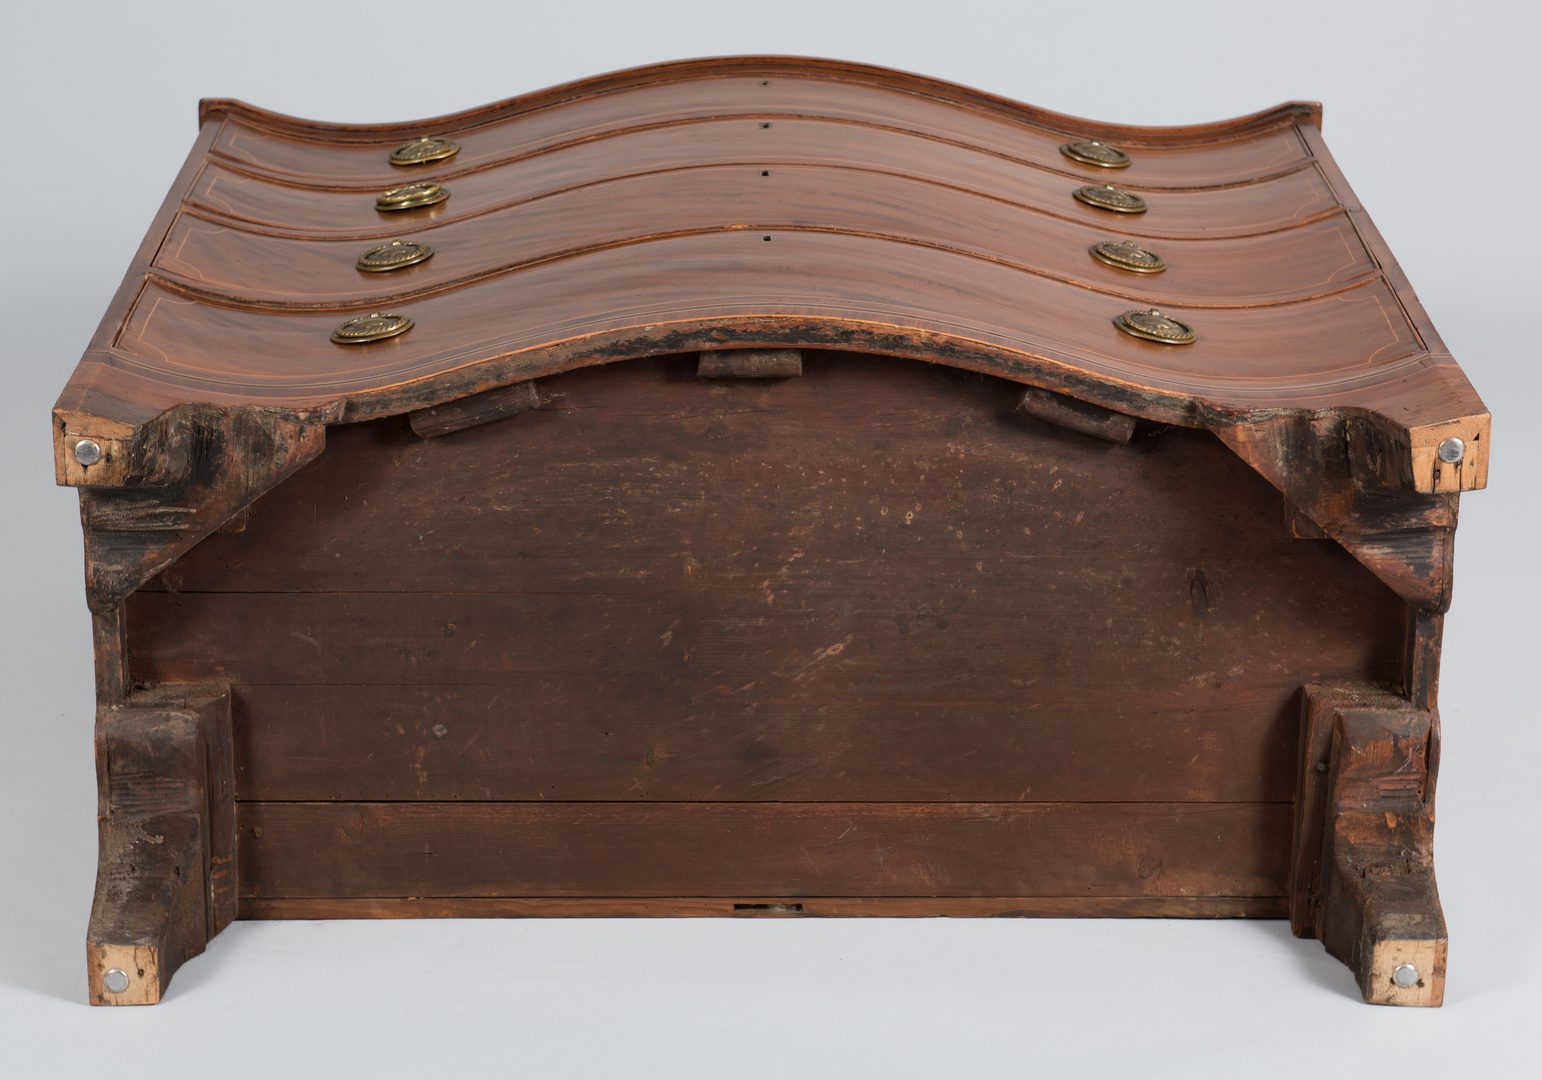 Lot 105: American or English Serpentine Chest, 19th c.